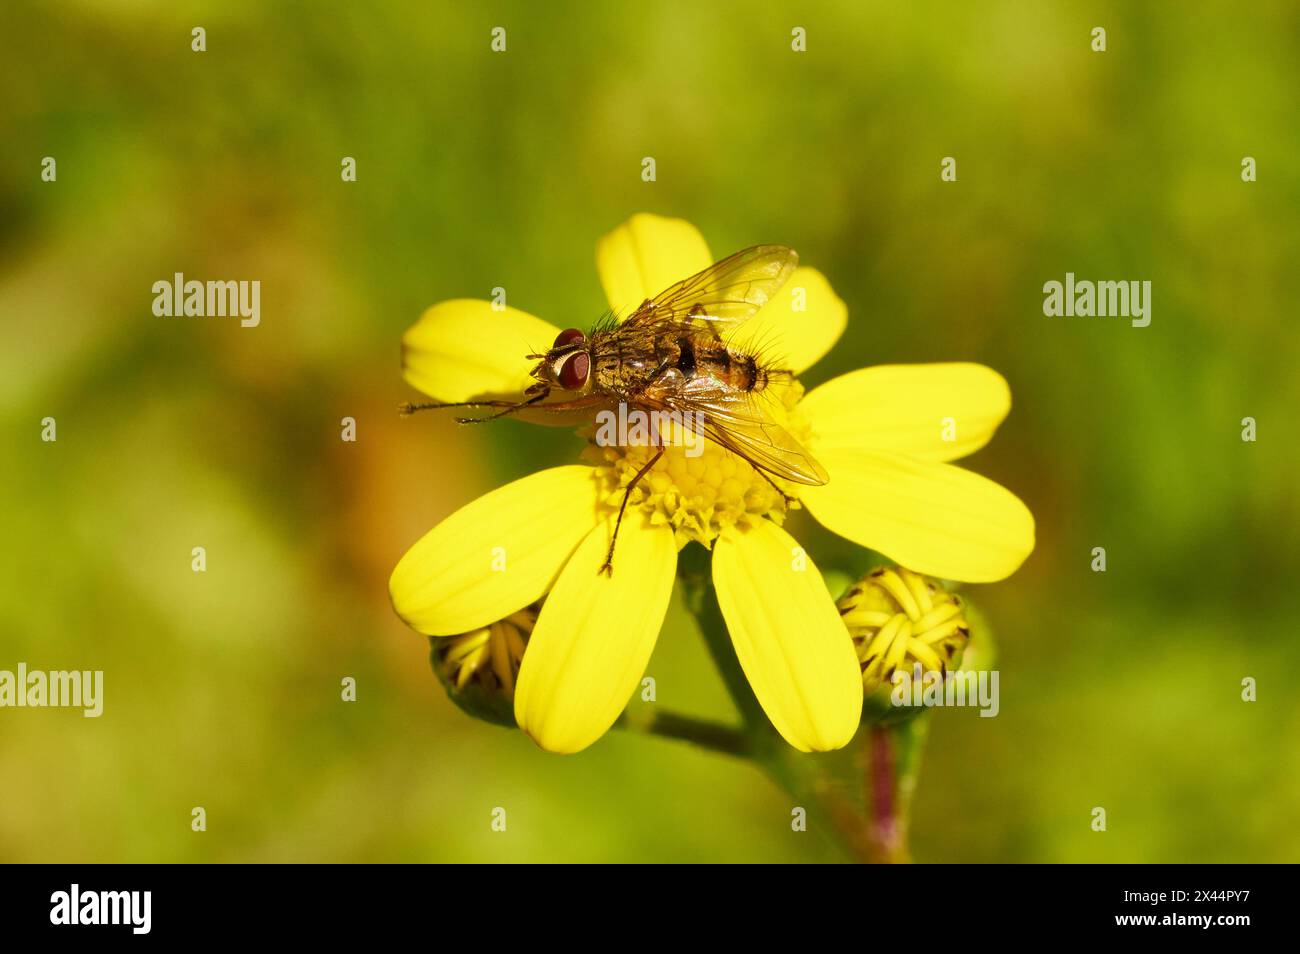 A fly with a triangular wing shape on the yellow flower of Perth Groundsel, Senecio condylus, an introduced plant to Perth, Western Australia. Stock Photo